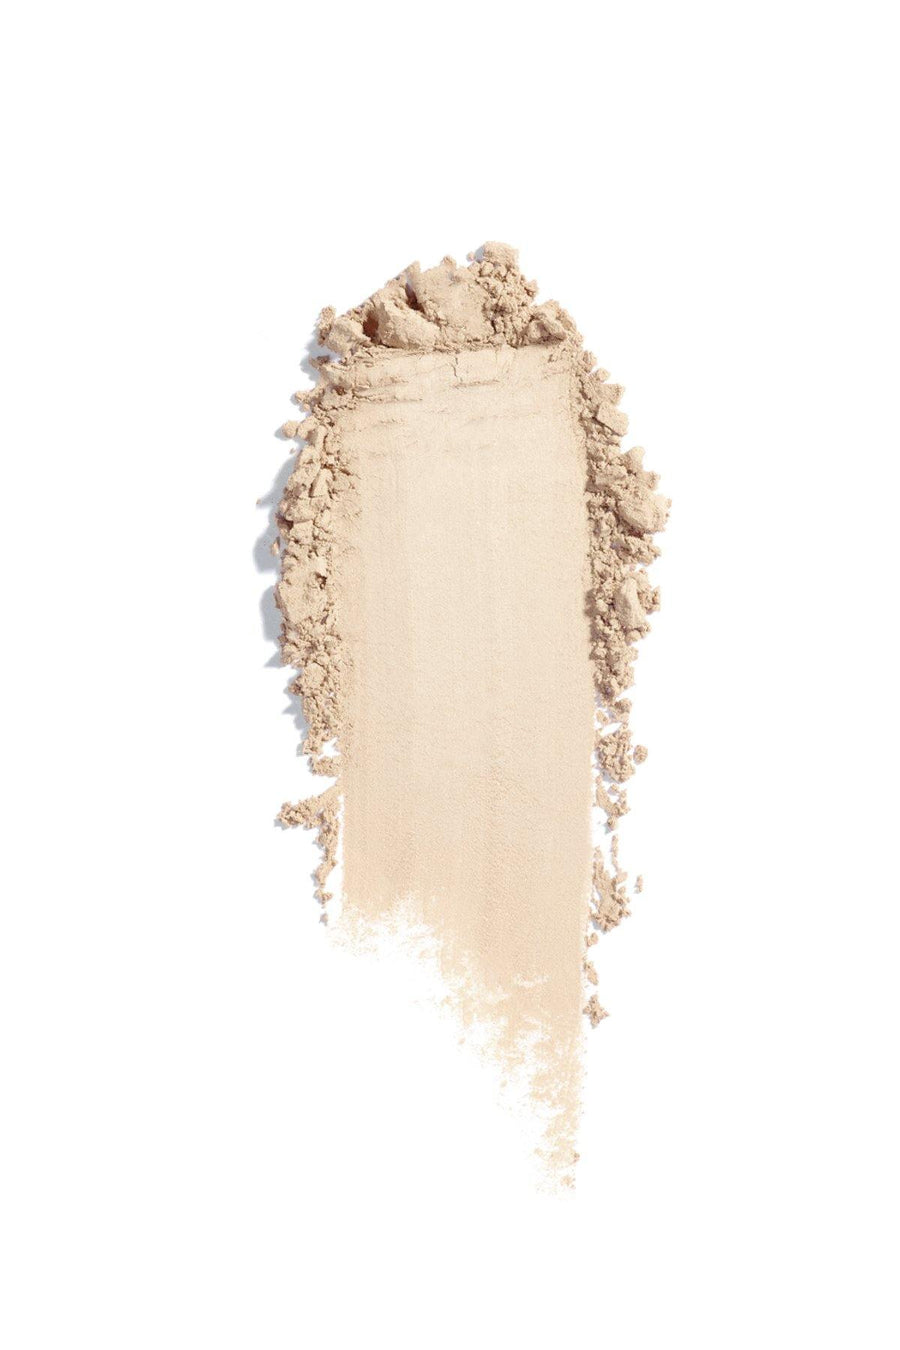 Mineral SPF 15 Foundation #1 - Fairest - Blend Mineral Cosmetics